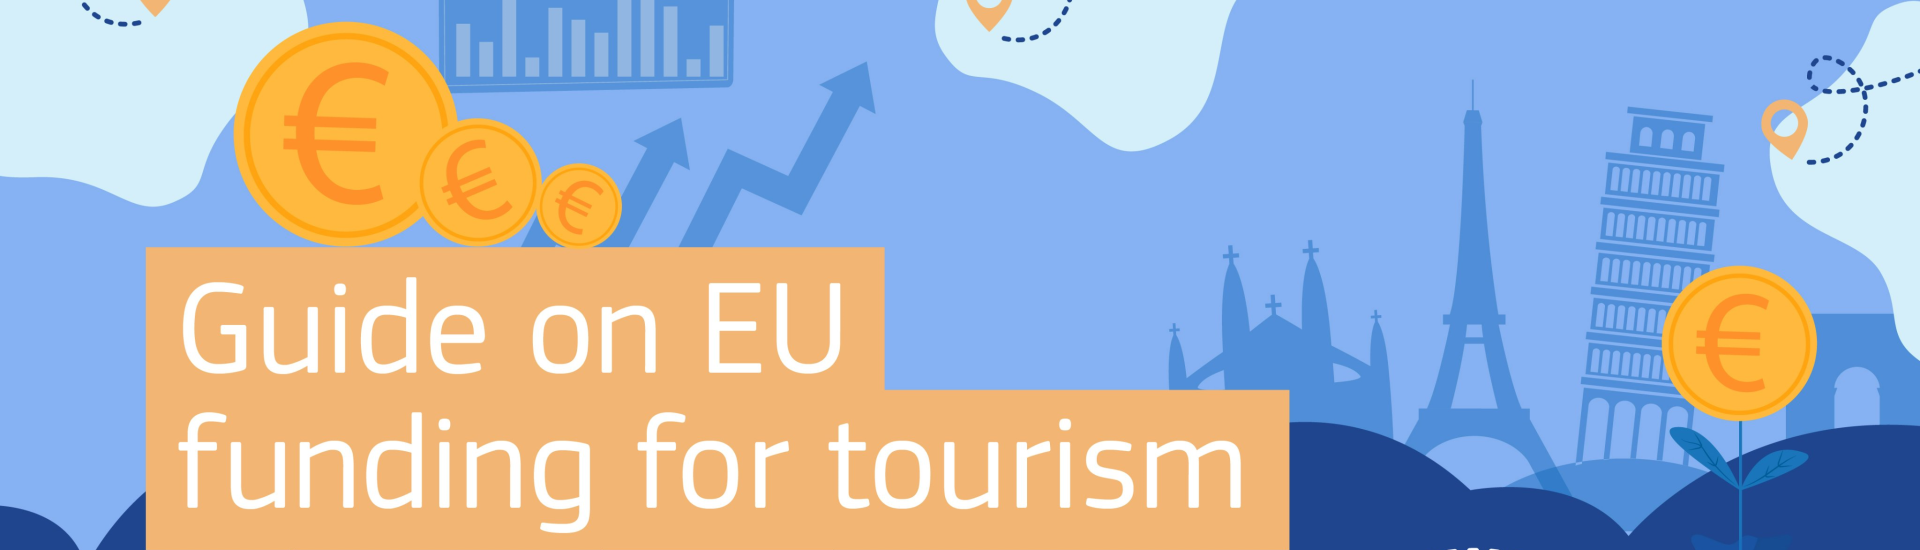 Online guide on European Union funding for tourism